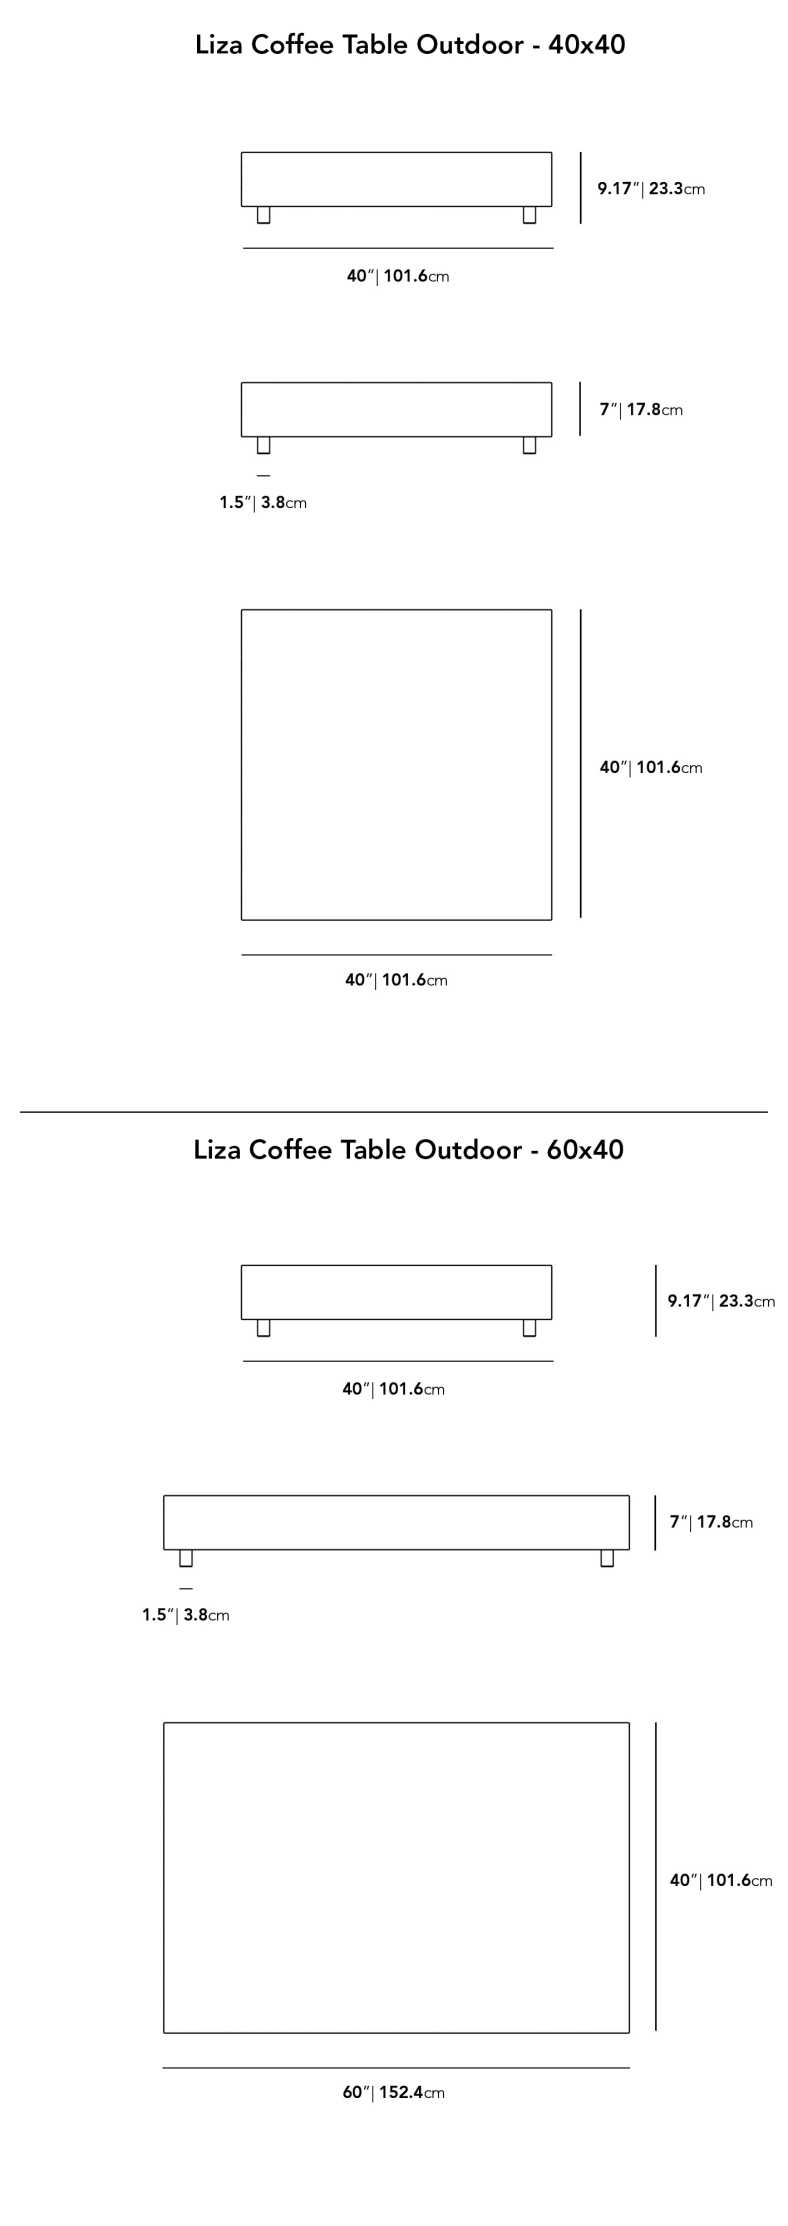 Dimensions for Liza Coffee Table 2022